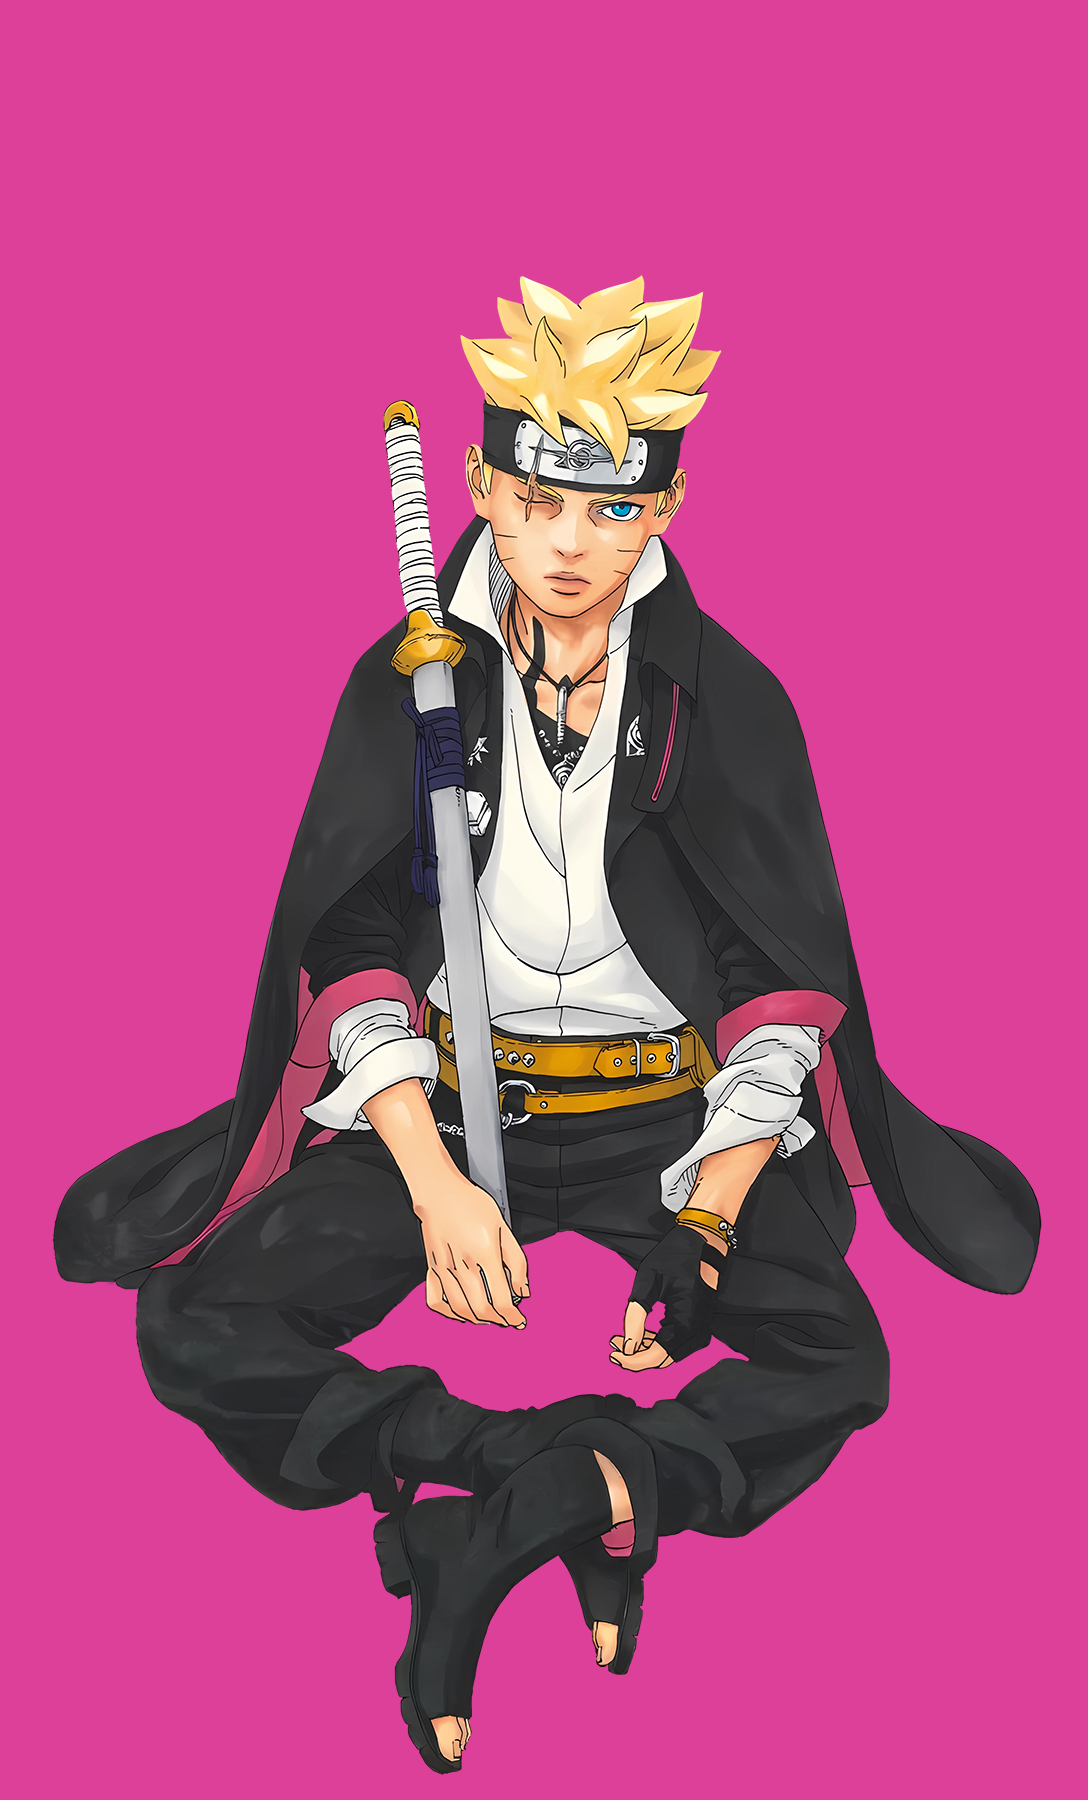 In the time skip, Boruto: Naruto Next Generations has brought many changes, including a new design for Boruto Uzumaki. The new design is a reflection of Boruto's growth and loss over the past three years.